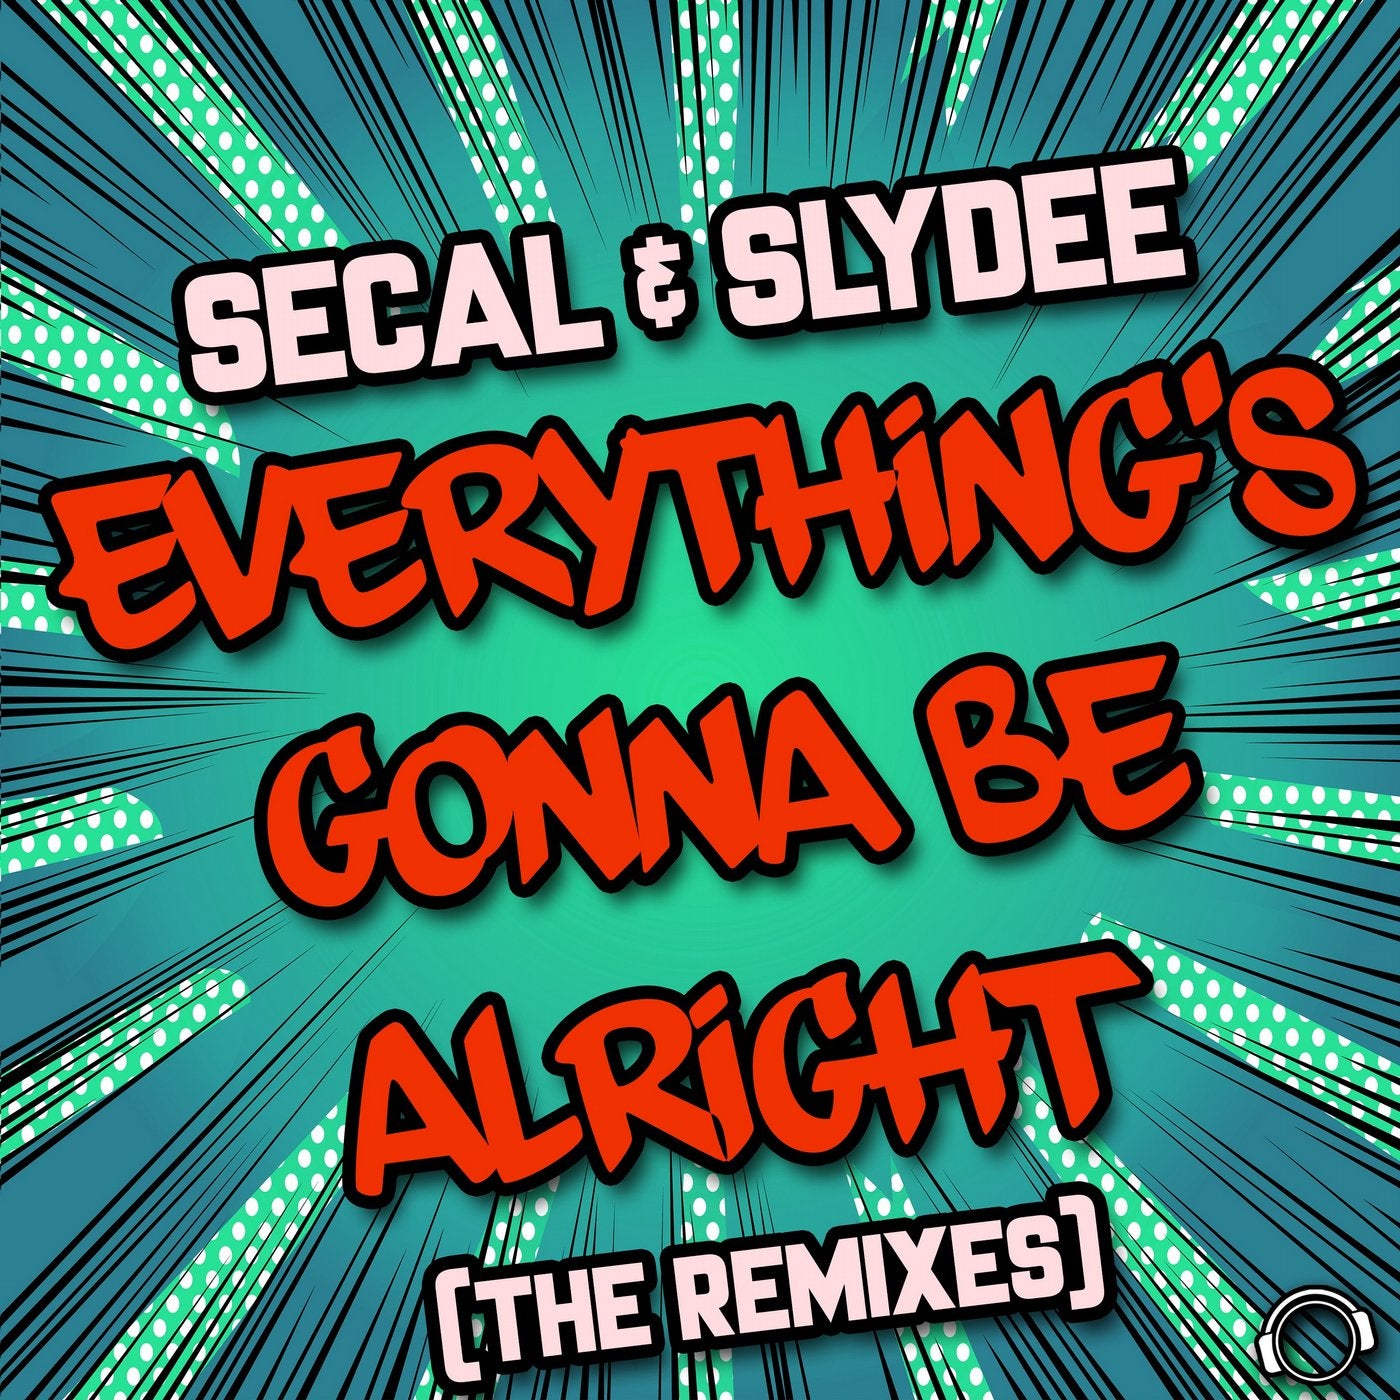 Everything's Gonna Be Alright (The Remixes)